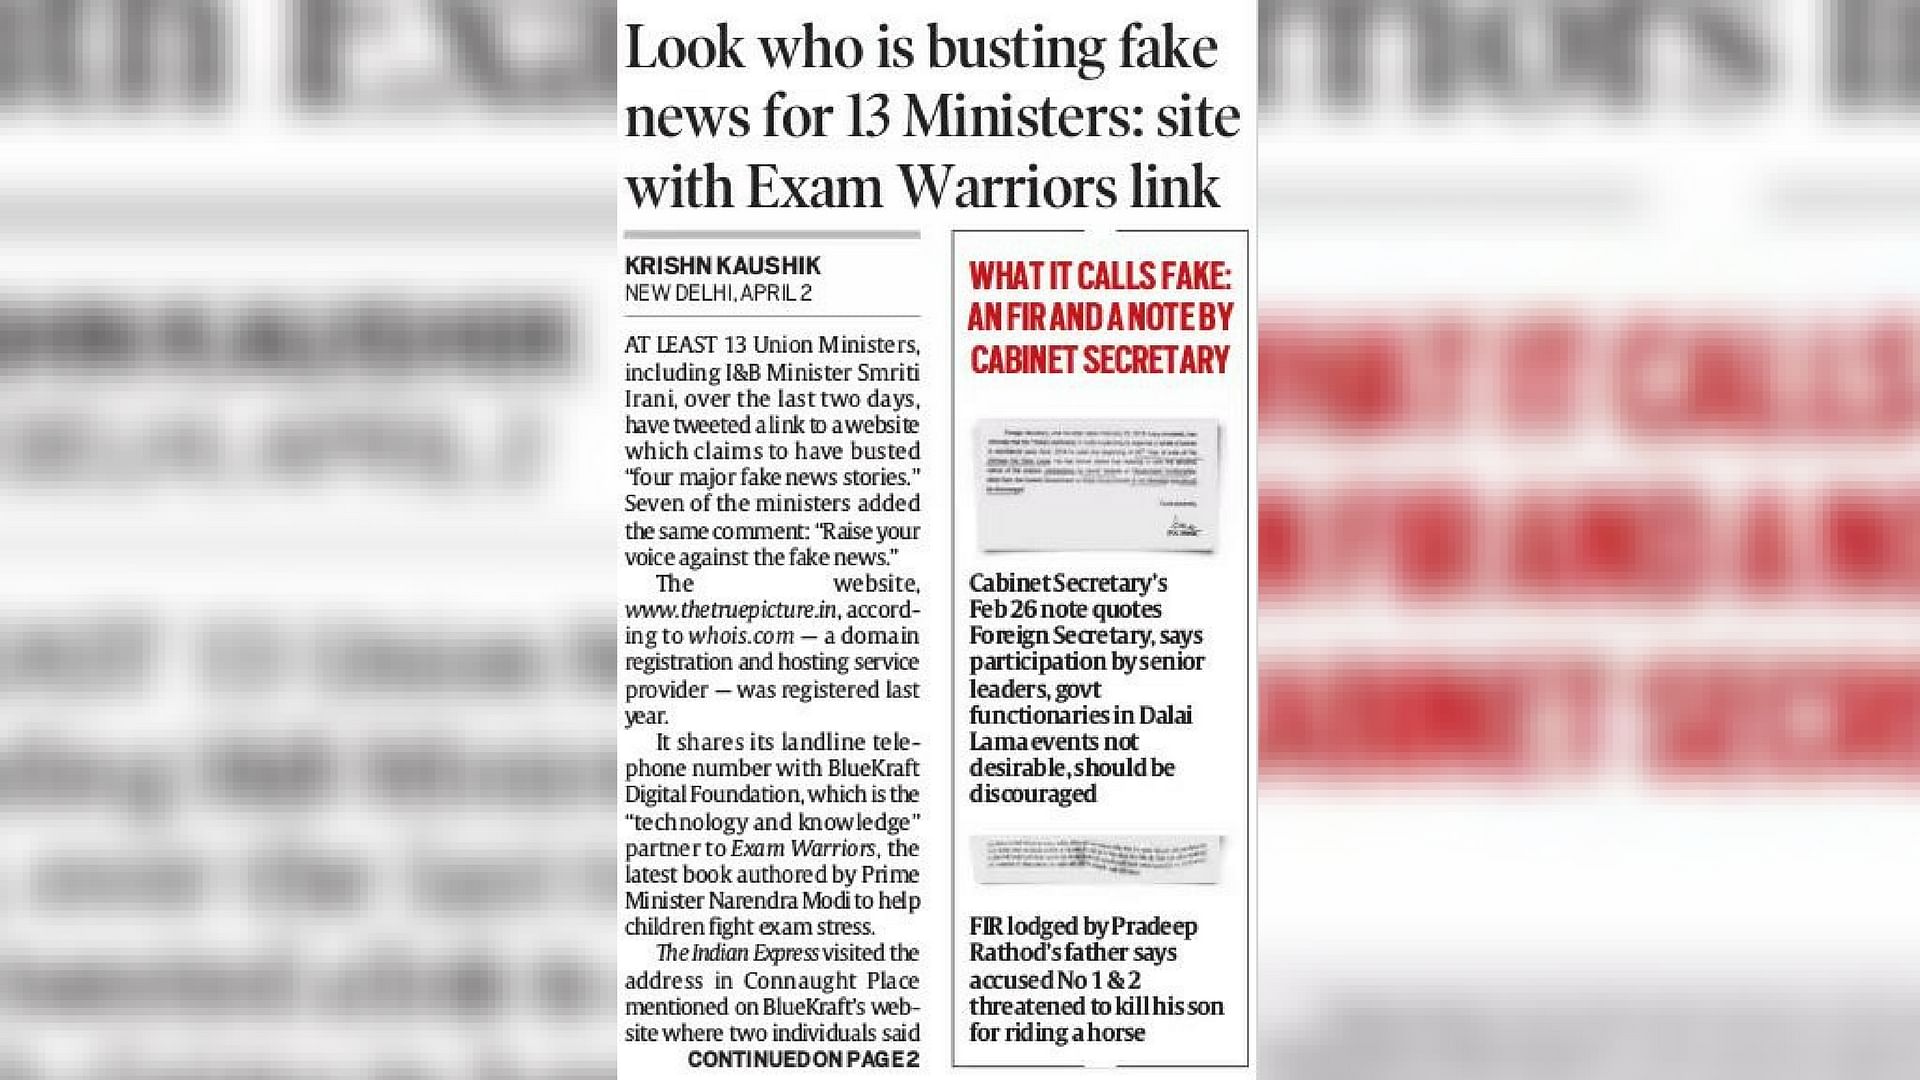 The Indian Express said BlueKraft, which is the “technology and knowledge” partner to Exam Warriors, the latest book by PM Modi, has links with thetruepicture.in website.